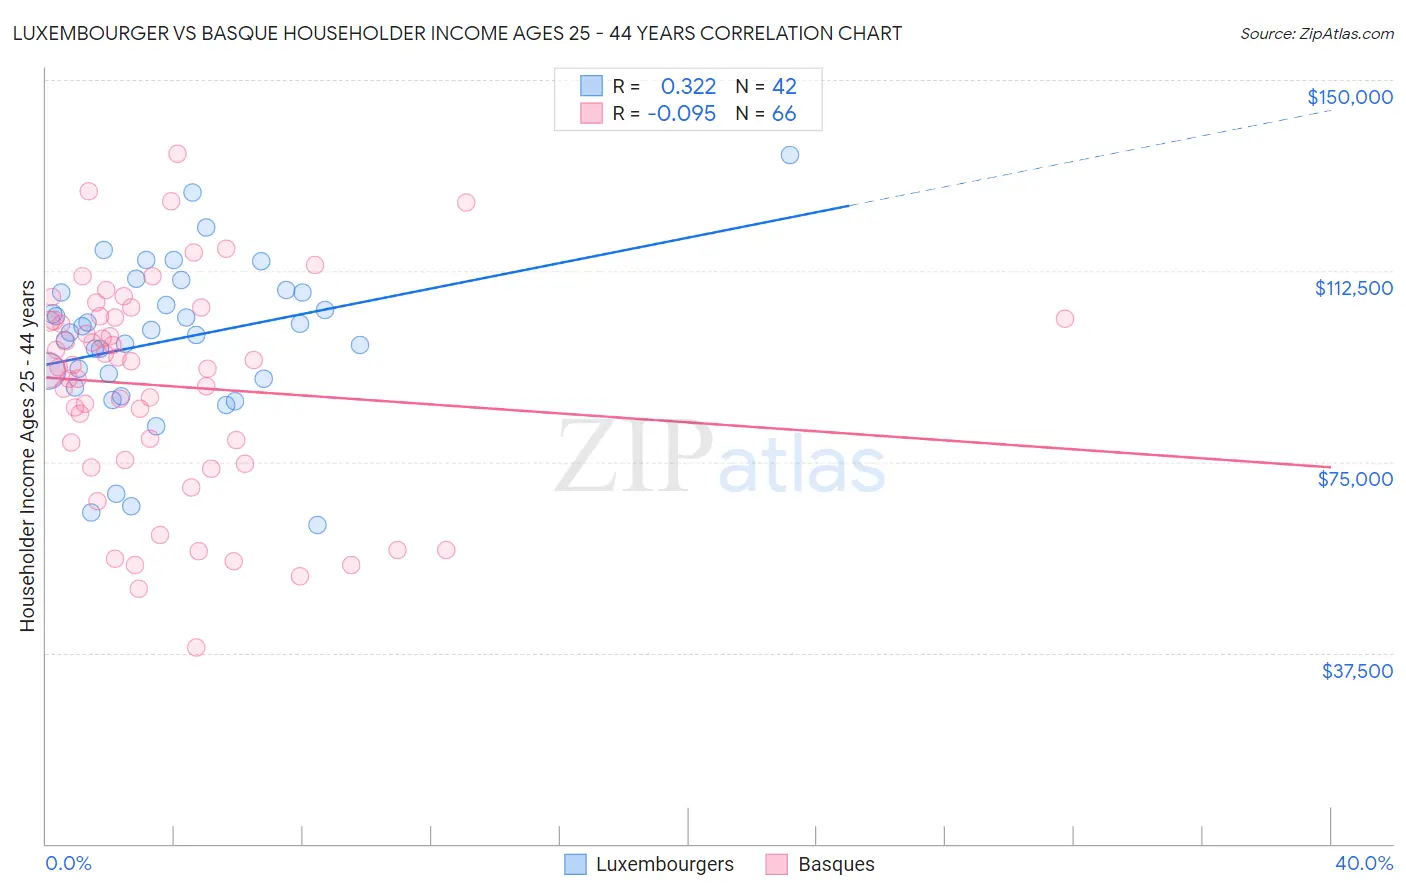 Luxembourger vs Basque Householder Income Ages 25 - 44 years